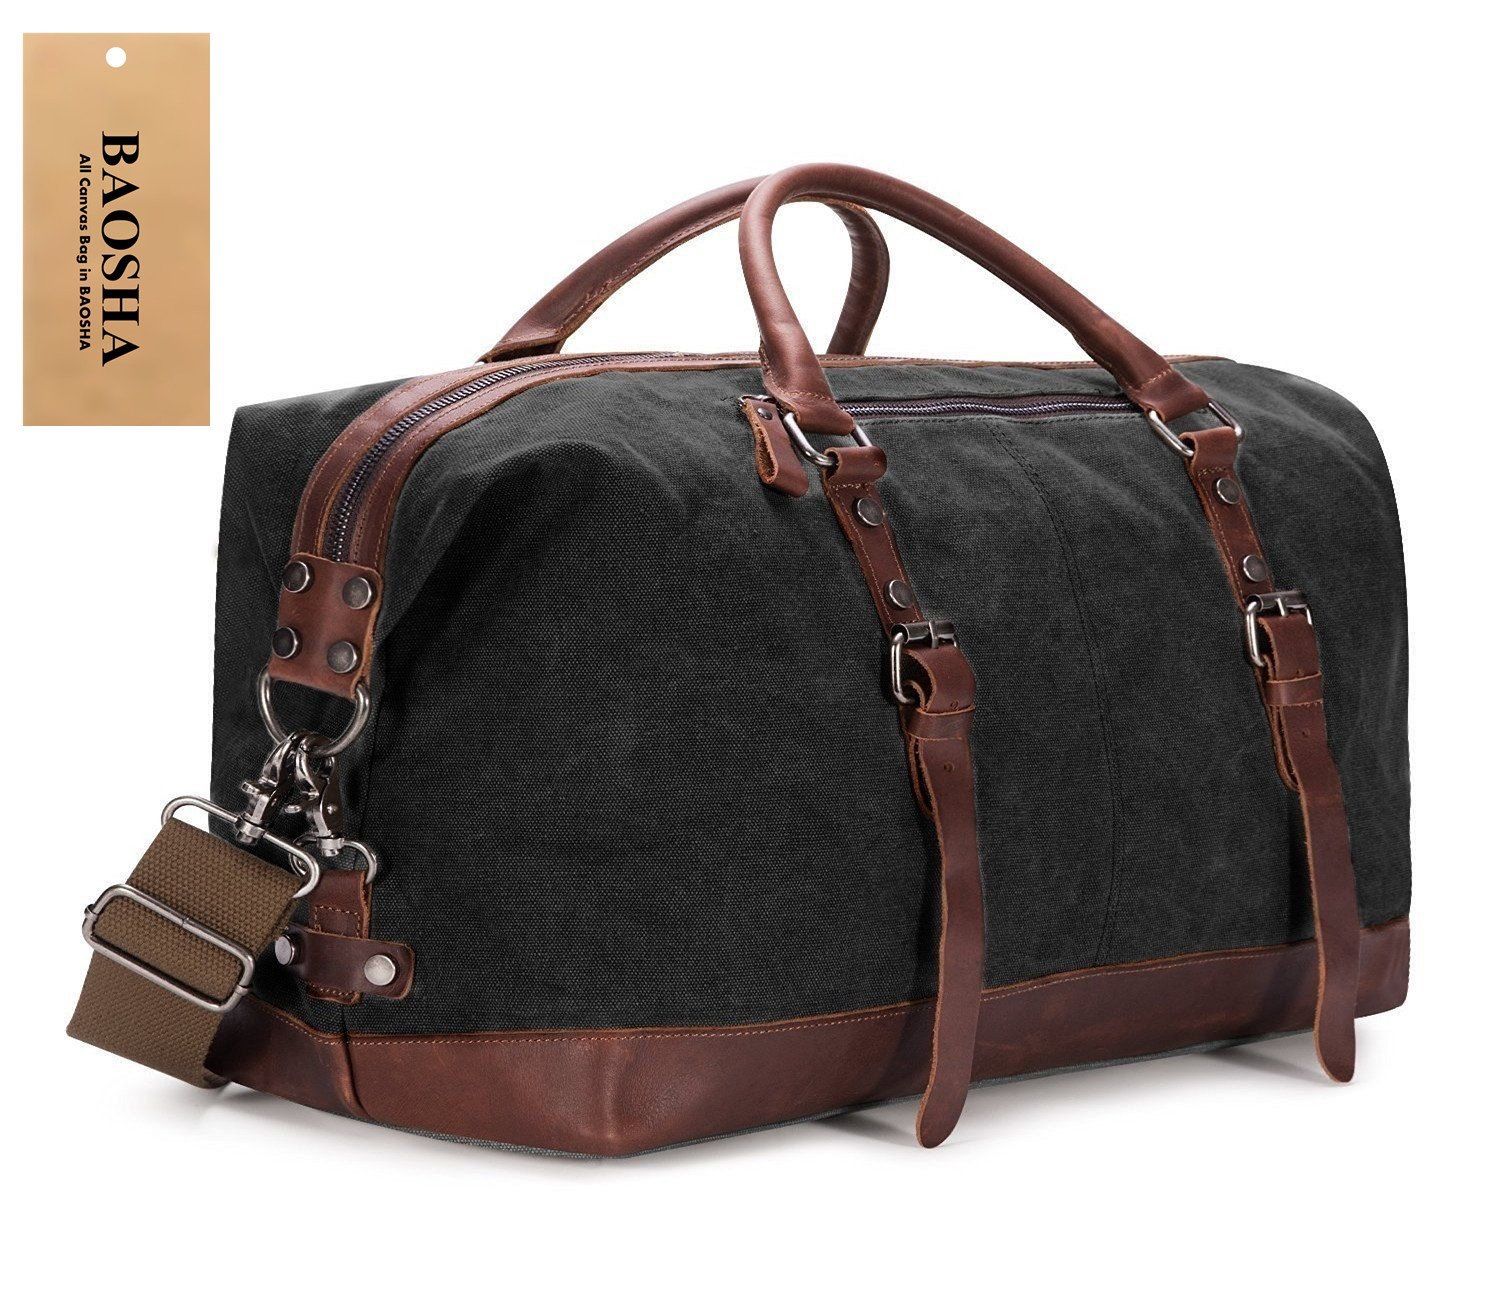 Brand new Canvas PU Leather Travel Tote Duffel Bag.(black)